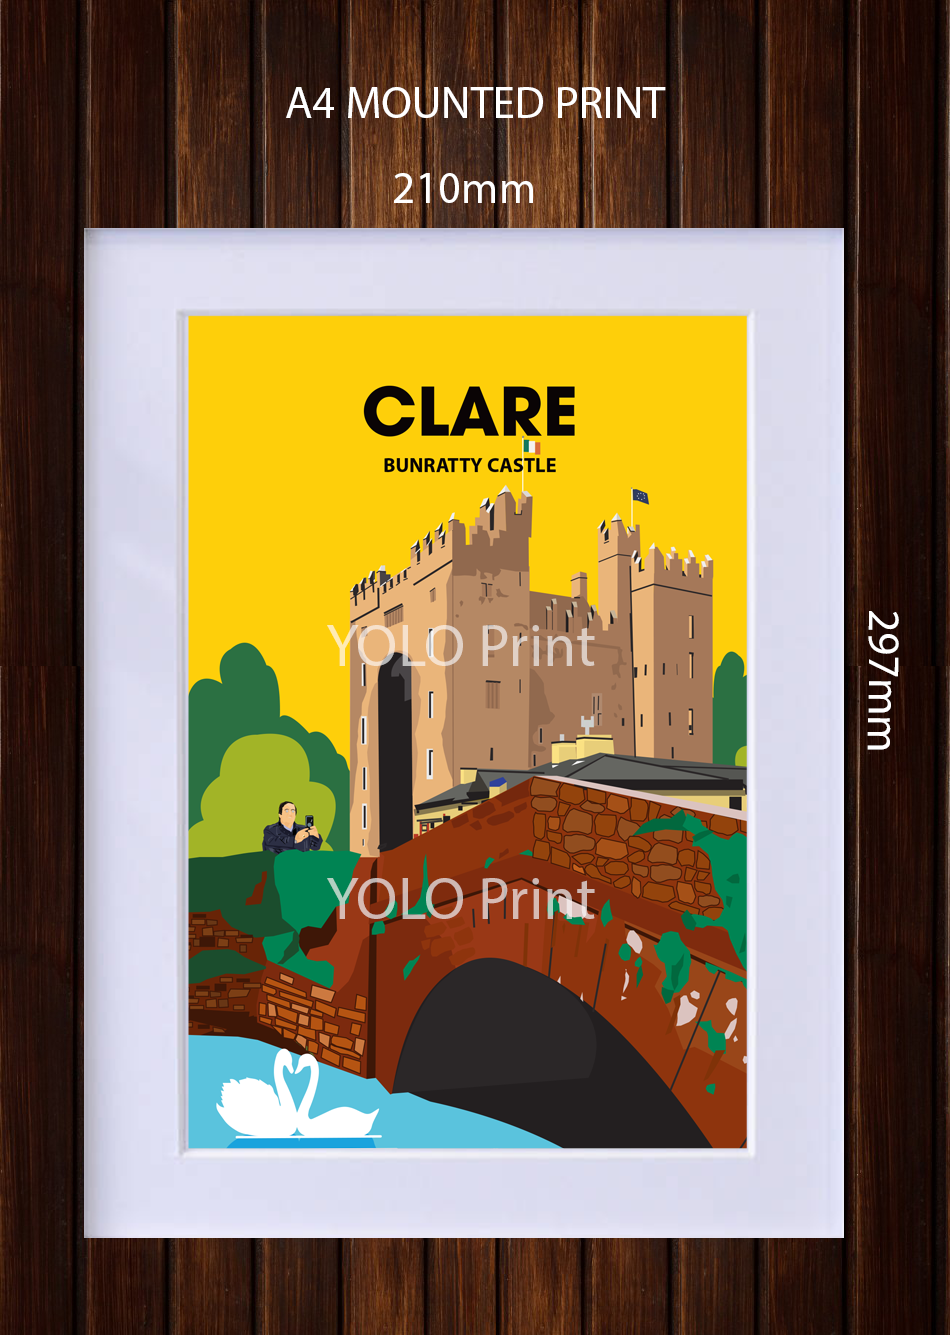 Clare Postcard or A4 Mounted Print or Fridge Magnet - Bunratty Castle